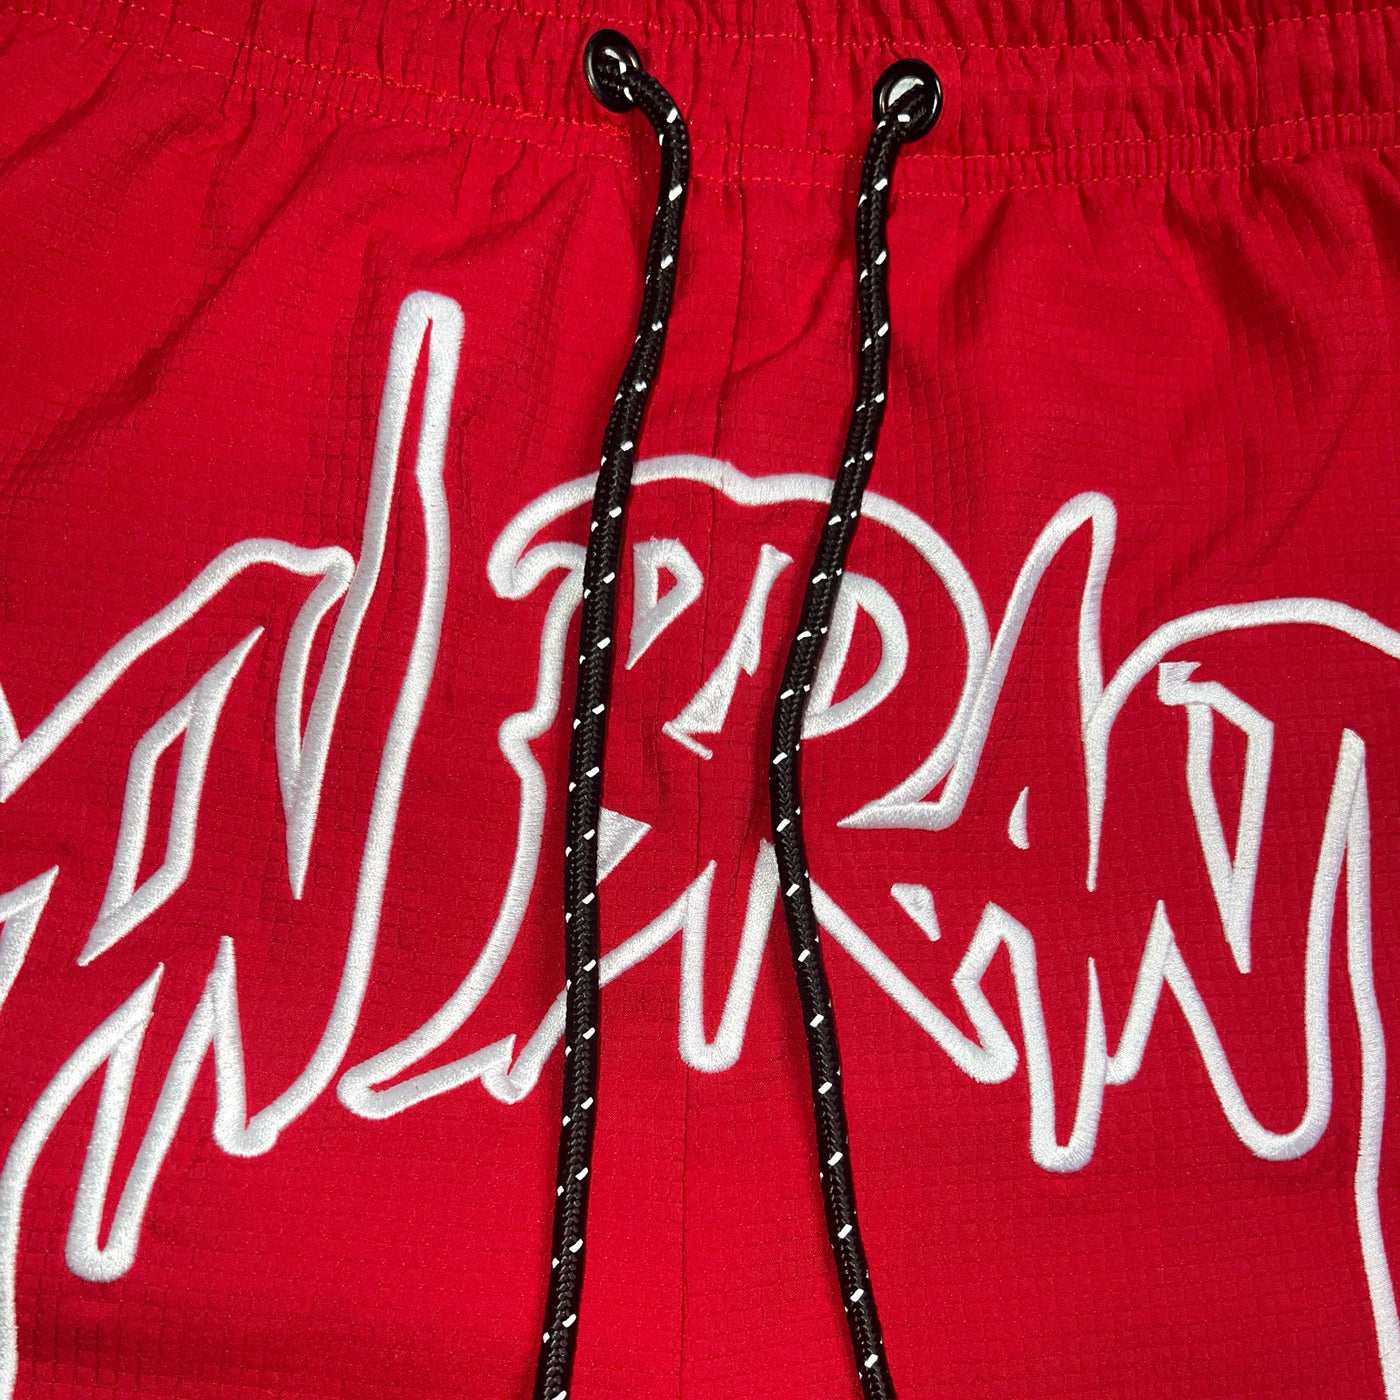 "Trail" Shorts (RED)